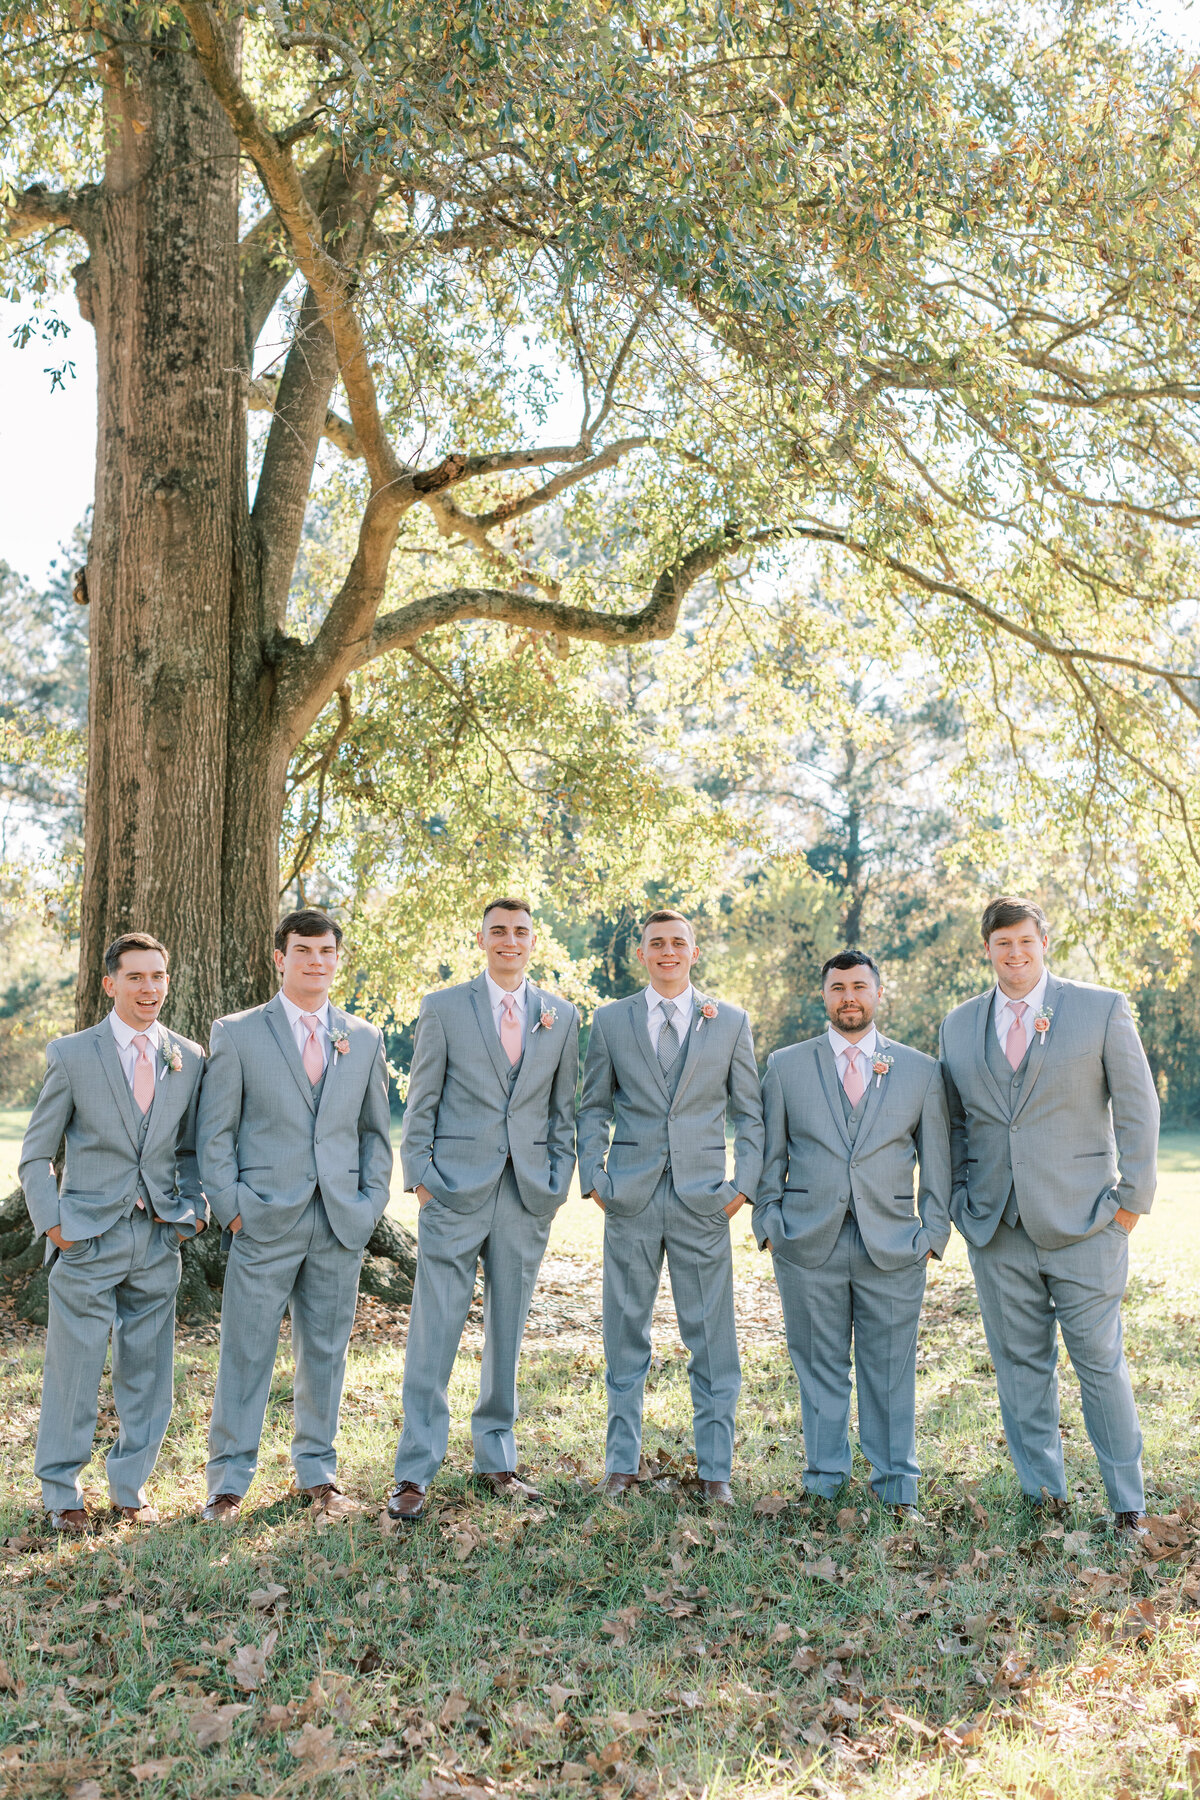 A groom stands with the groomsmen.